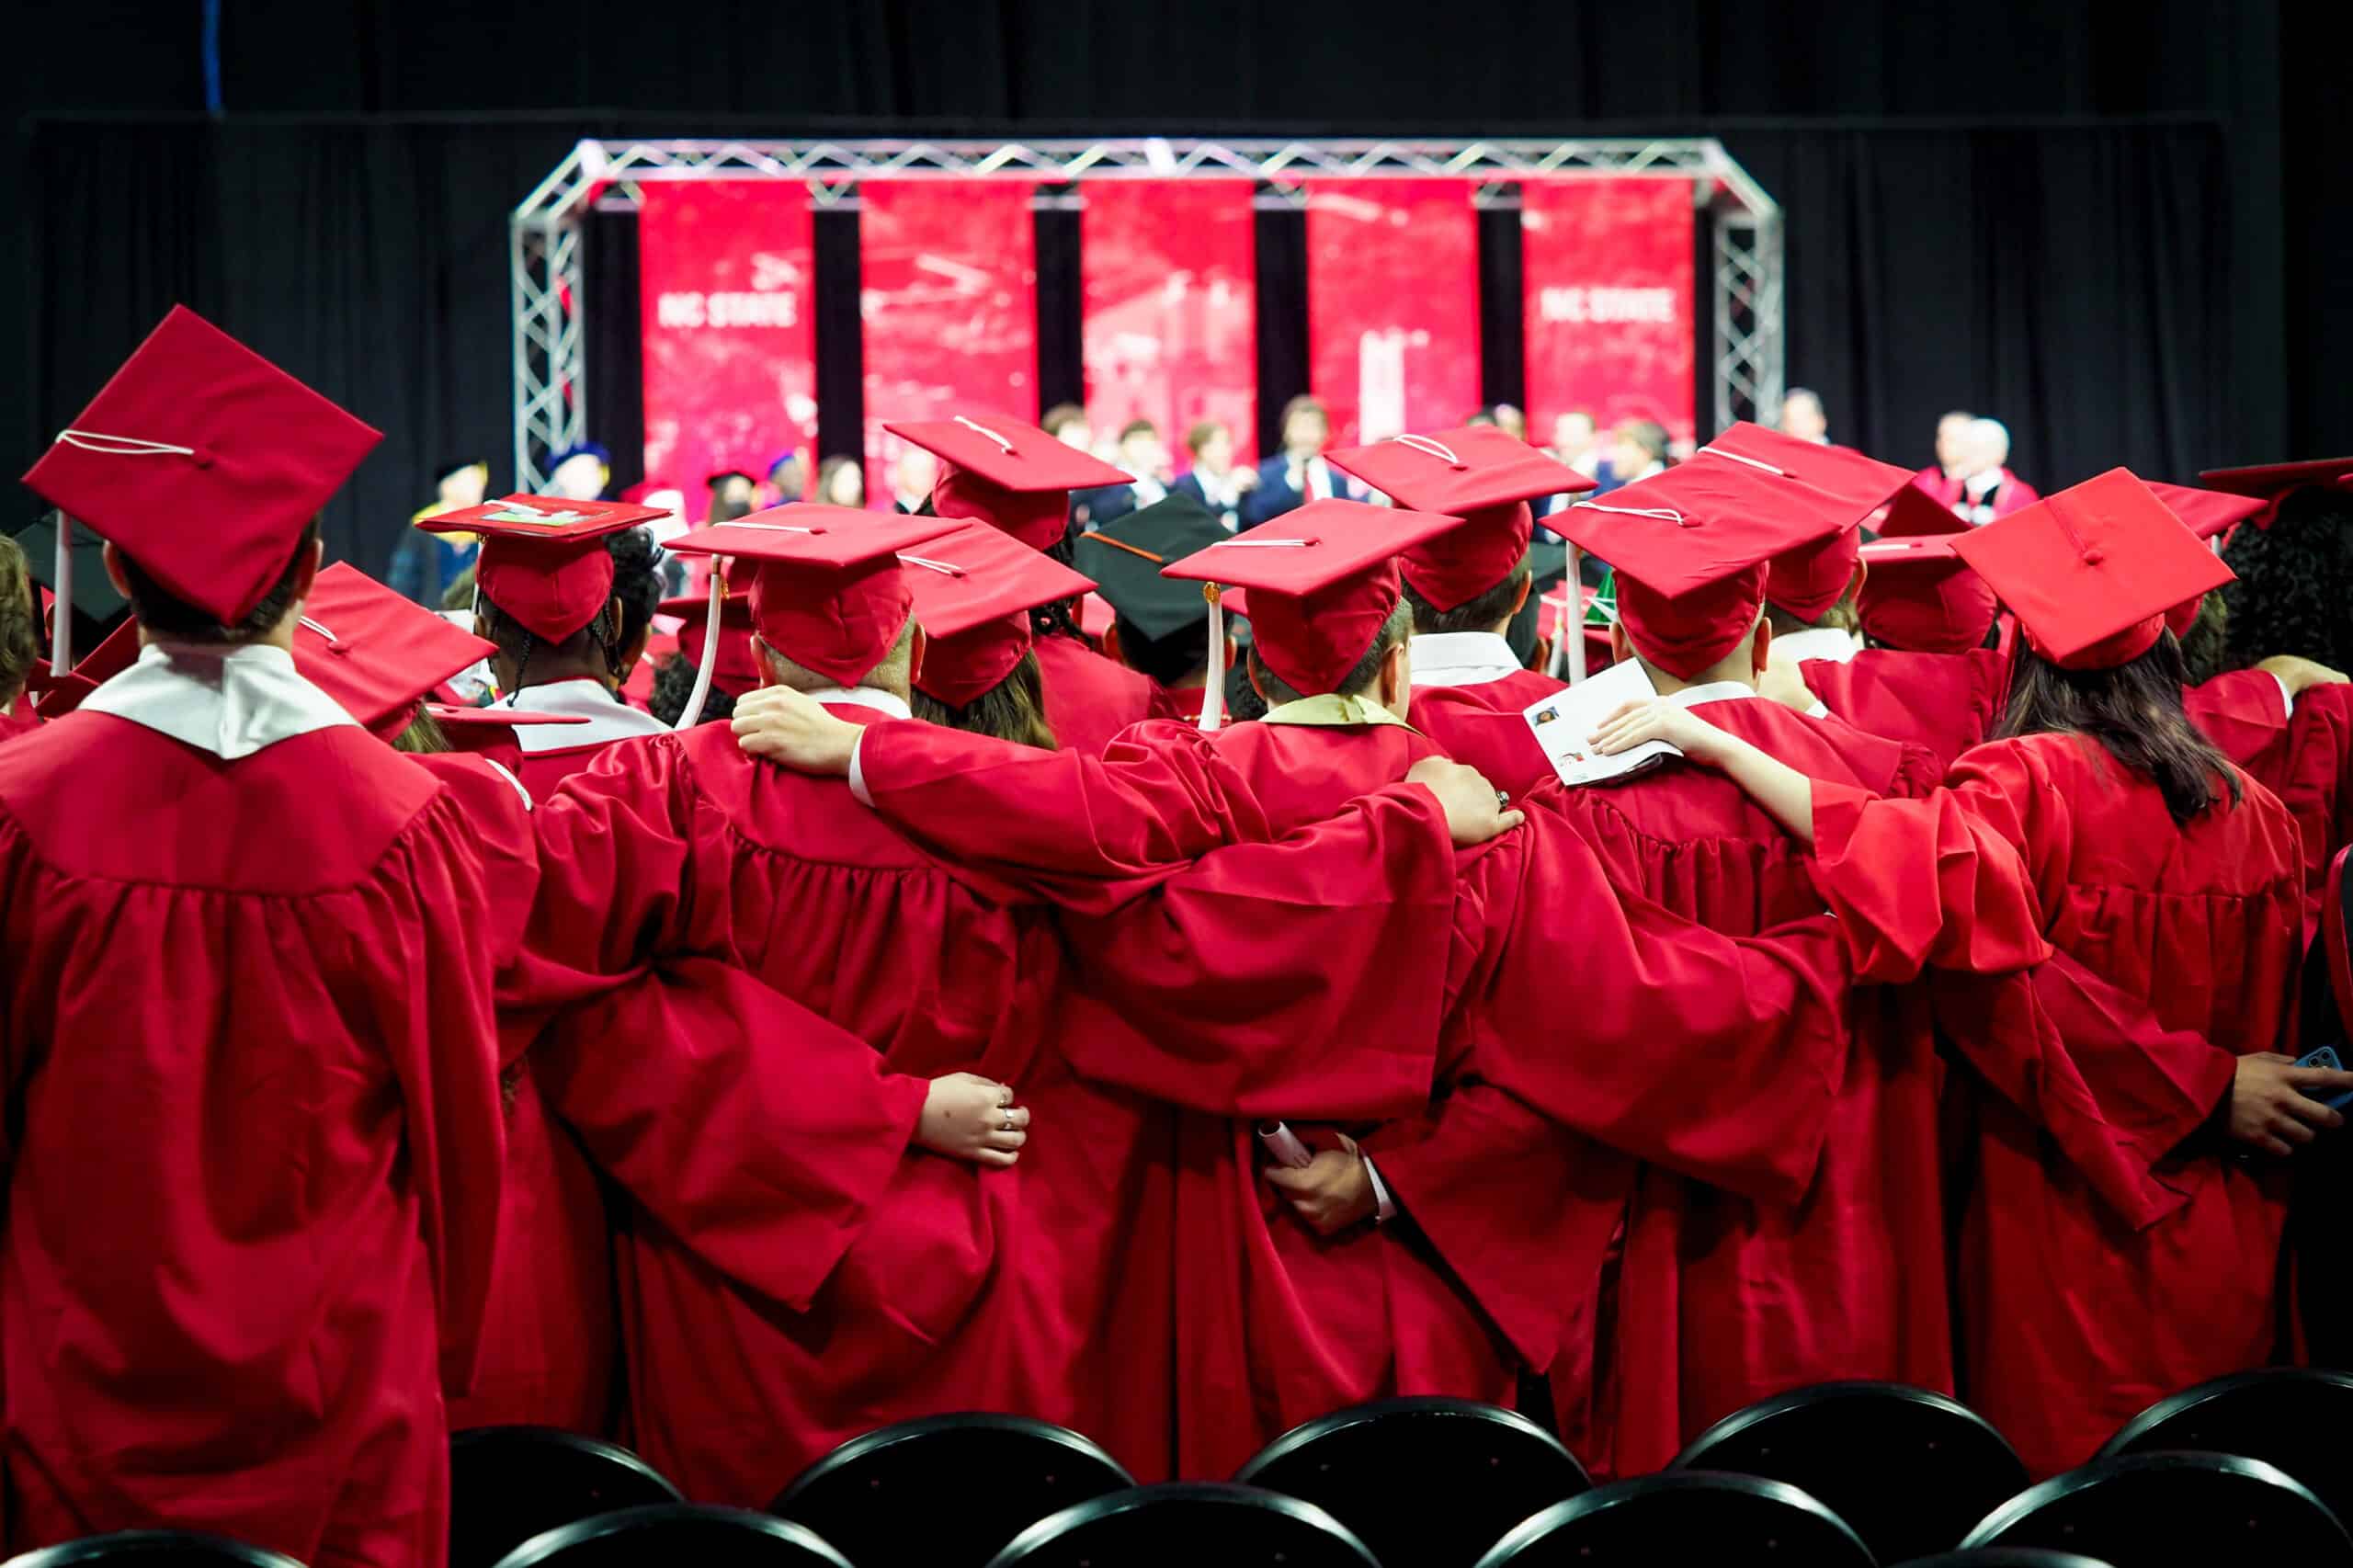 Students in their red graduation robes embrace and face the stage in PNC Arena